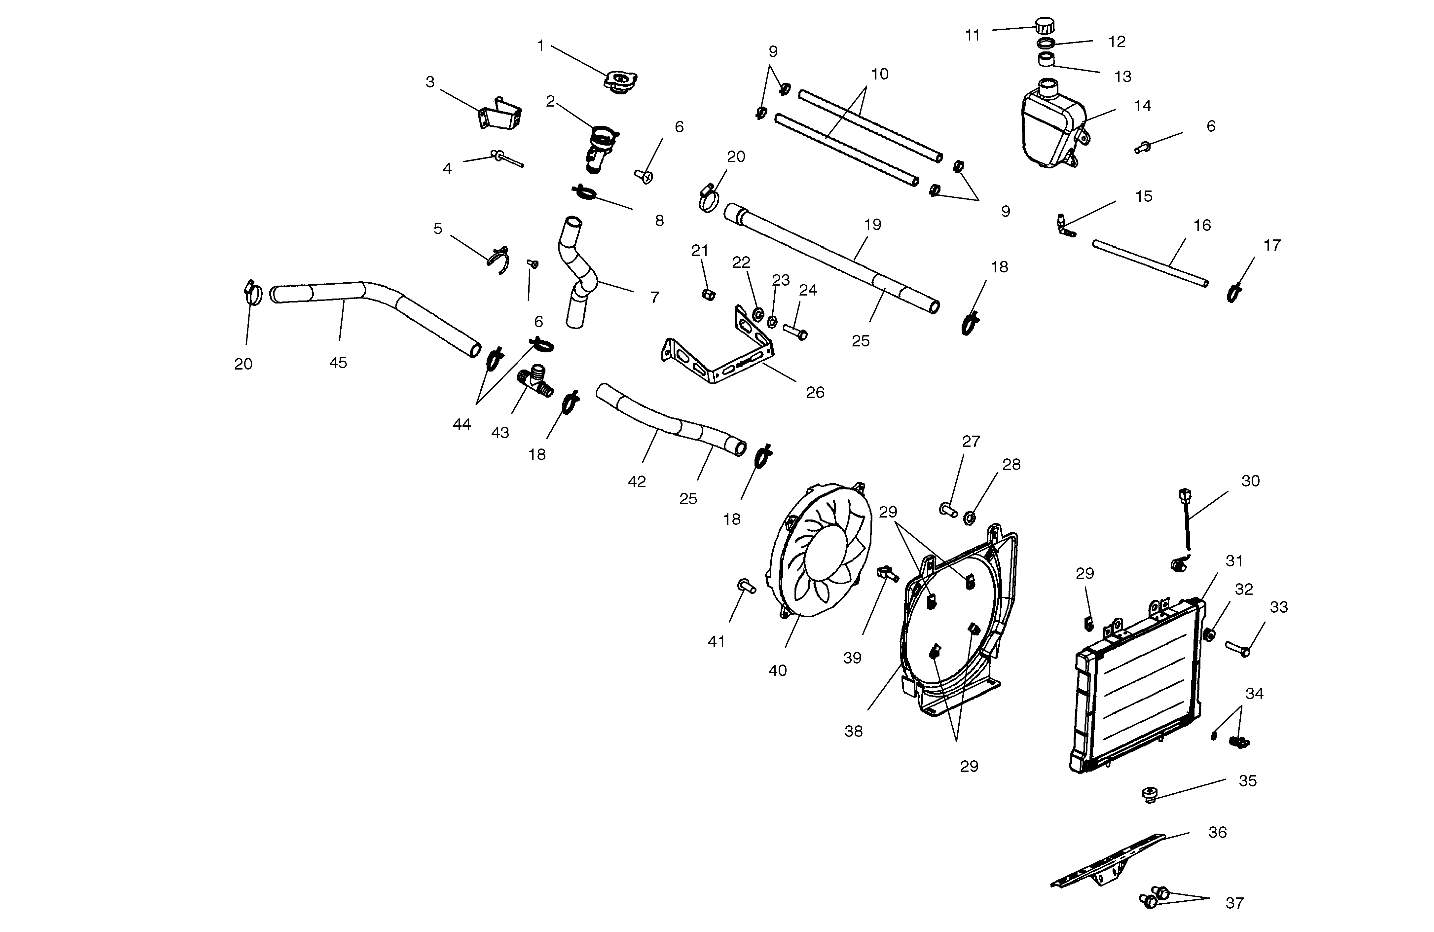 Part Number : 5411975 GROMMET AND INSERT ASSEMBLY